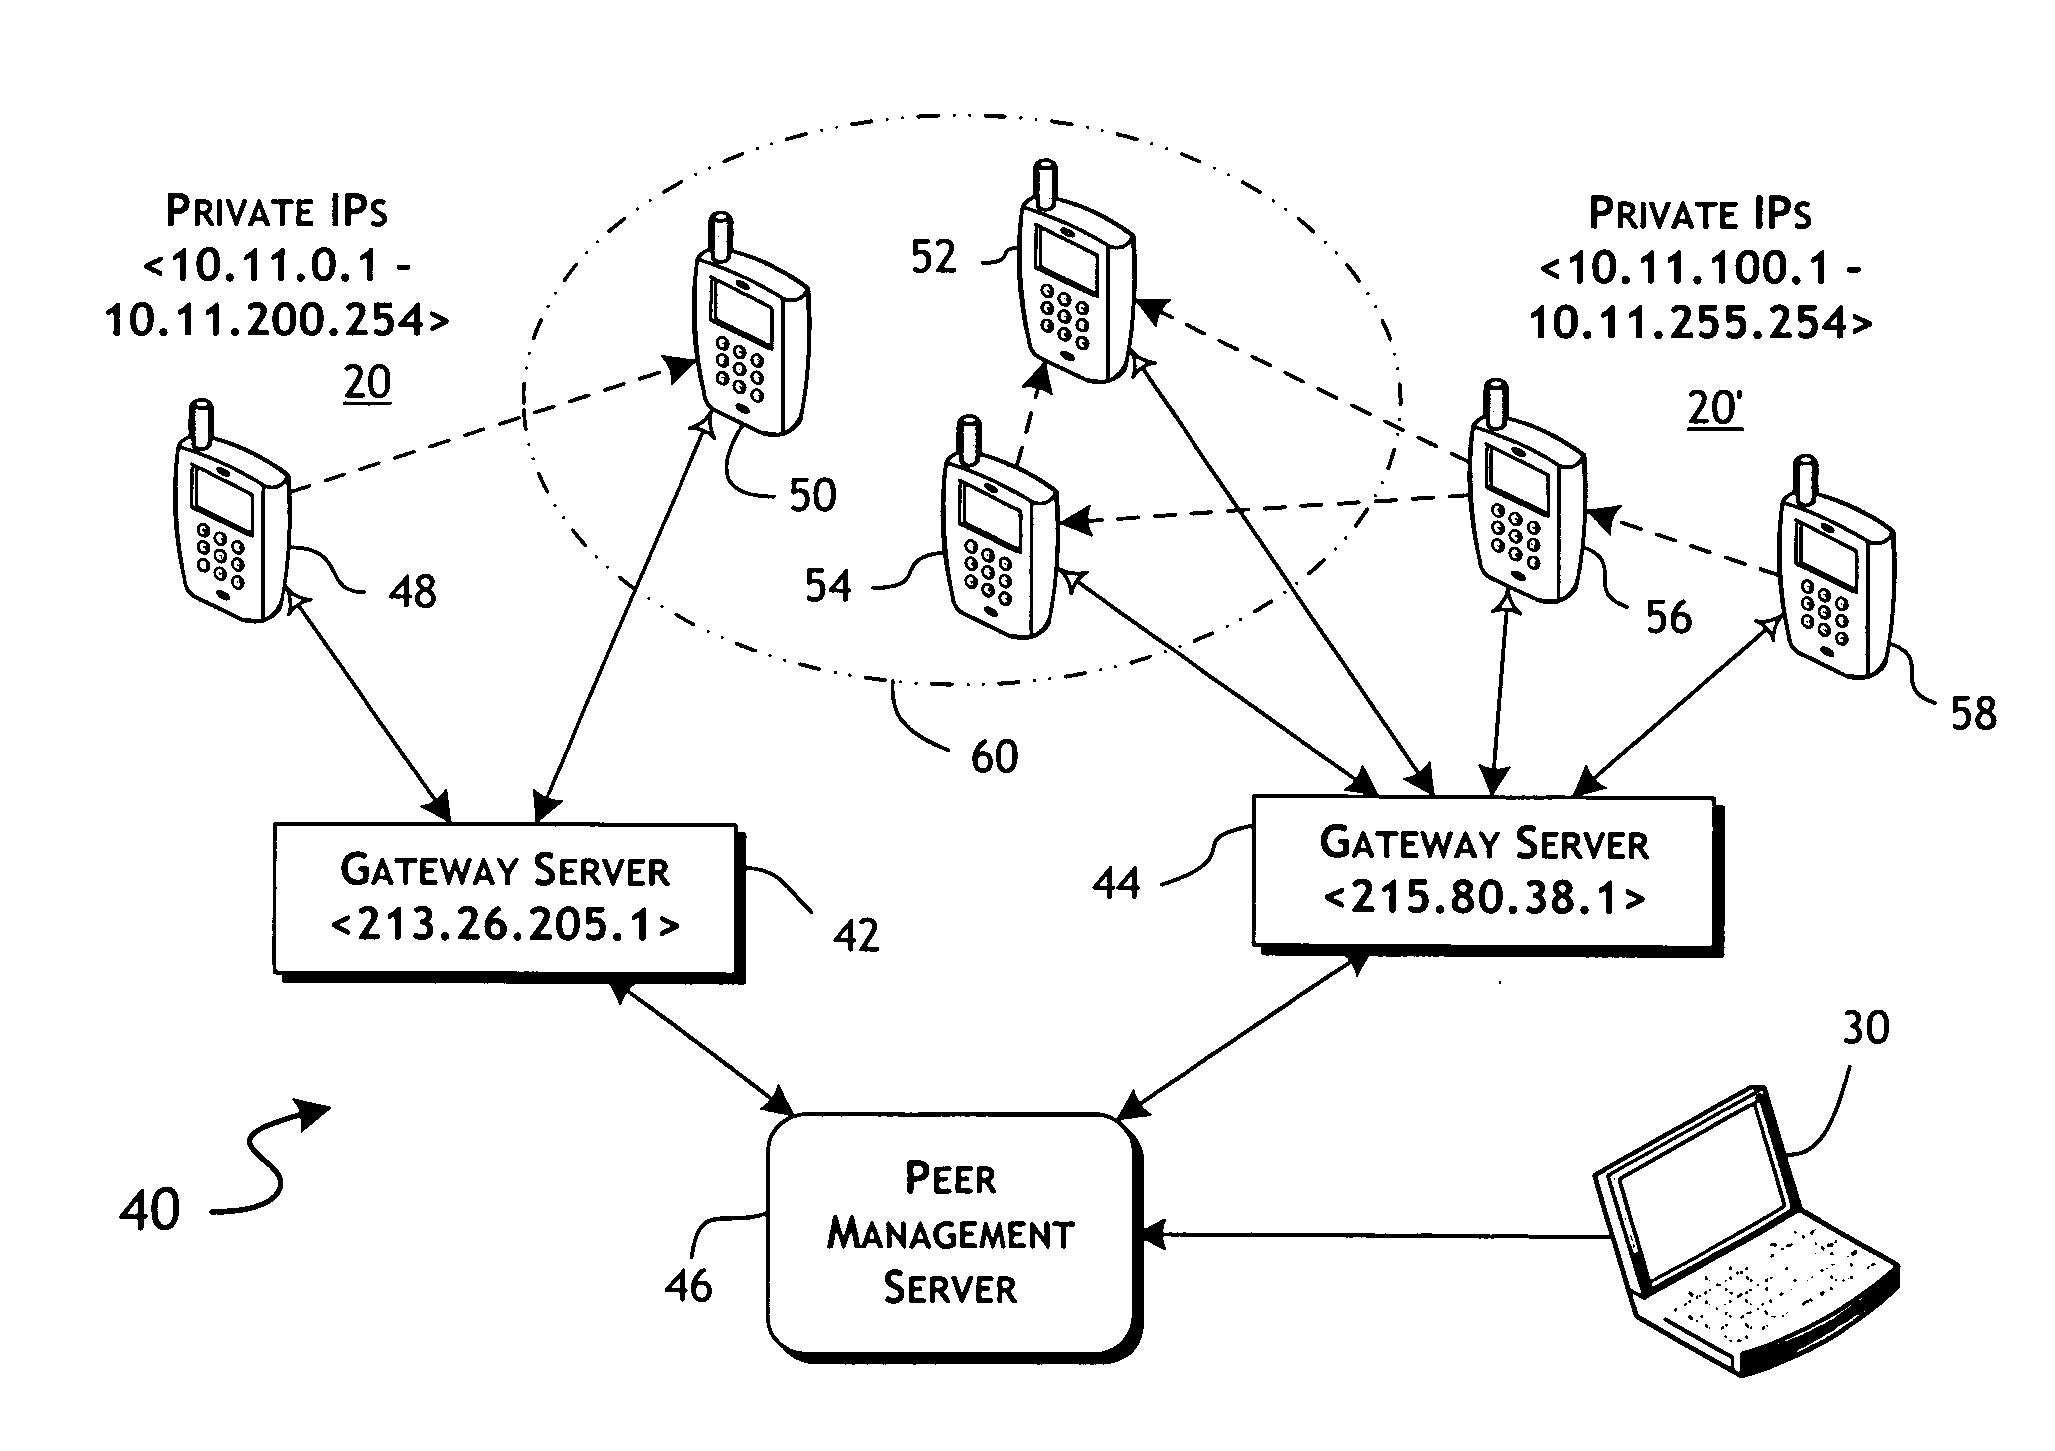 Peer shared server event notification system and methods